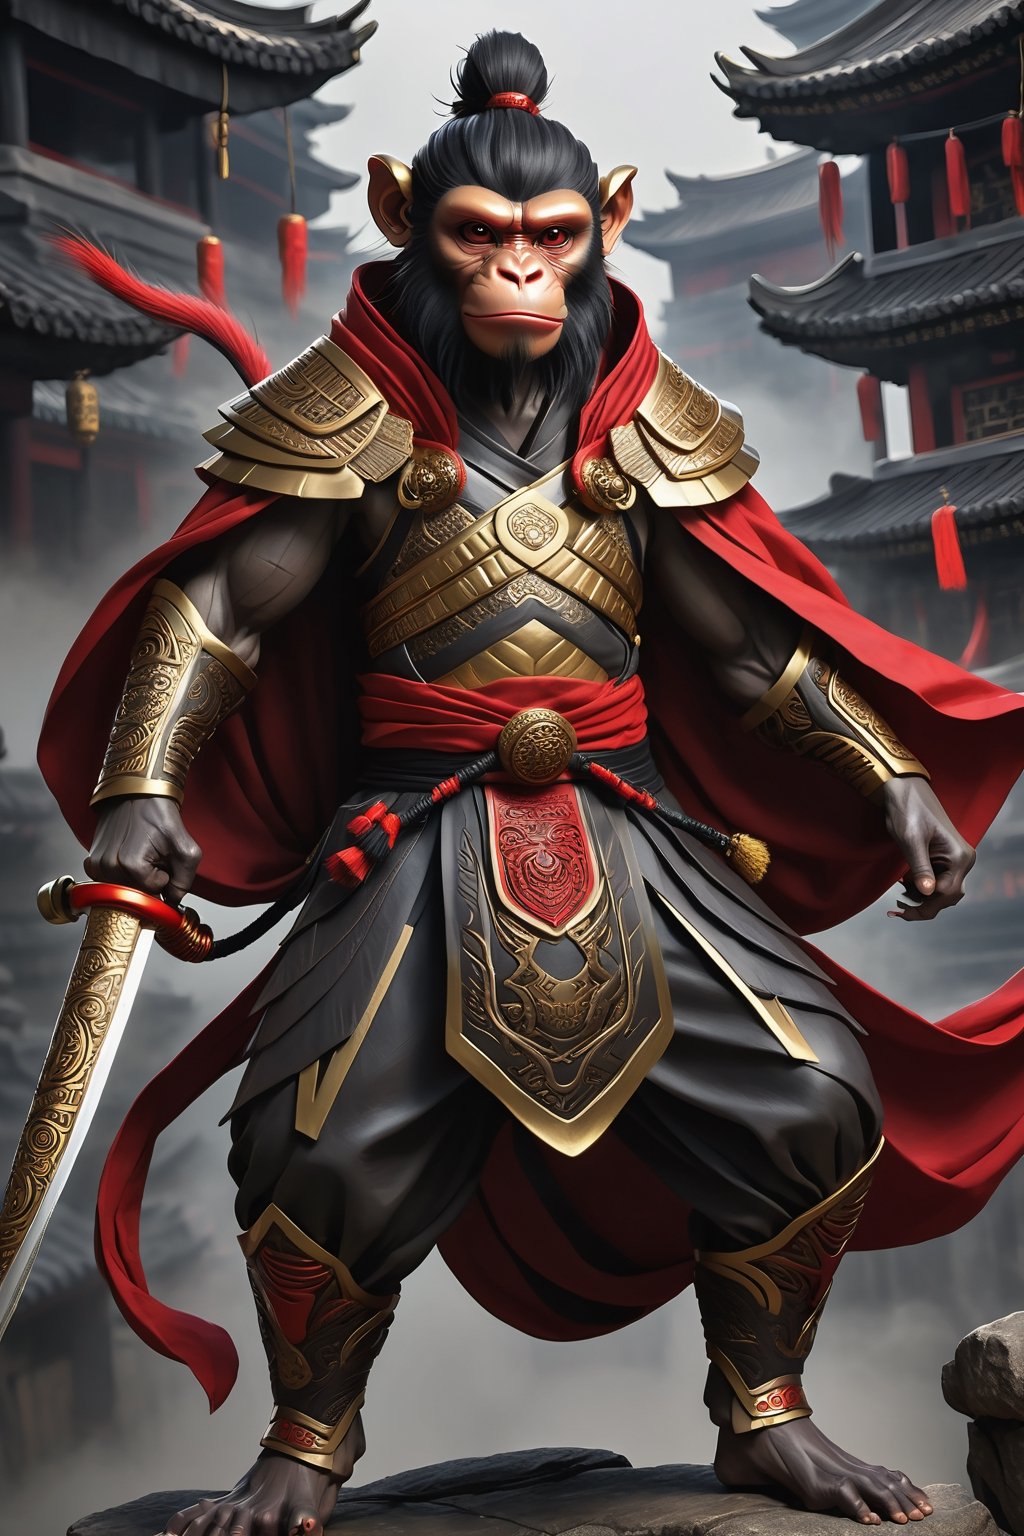 a man  Mythical hero Monkey-like features Playful yet serious expression Humanoid figure Expressive facial features Mystical aura Iconic headband Tail  
Ancient city Ultra-fine painting
Black armor
Red cloak
Fierce expression
Indomitable will
Invincible aura
Lonely guardian
Warring States, Three Kingdoms style
Aerial view
Ferocious face
Sharp eyes
Fluttering armor and cloak
Ruined ancient city
Desolate atmosphere
Central figure
Dark sky
Dark, gray, brown tones Red and gold highlights


3D Realistic Style Highly detailed 4k, 8k, highres: 4K, 8K
Realistic, photorealistic, photo-realistic, in the style of esao andrews,DonM3lv3nM4g1cXL,LegendDarkFantasy